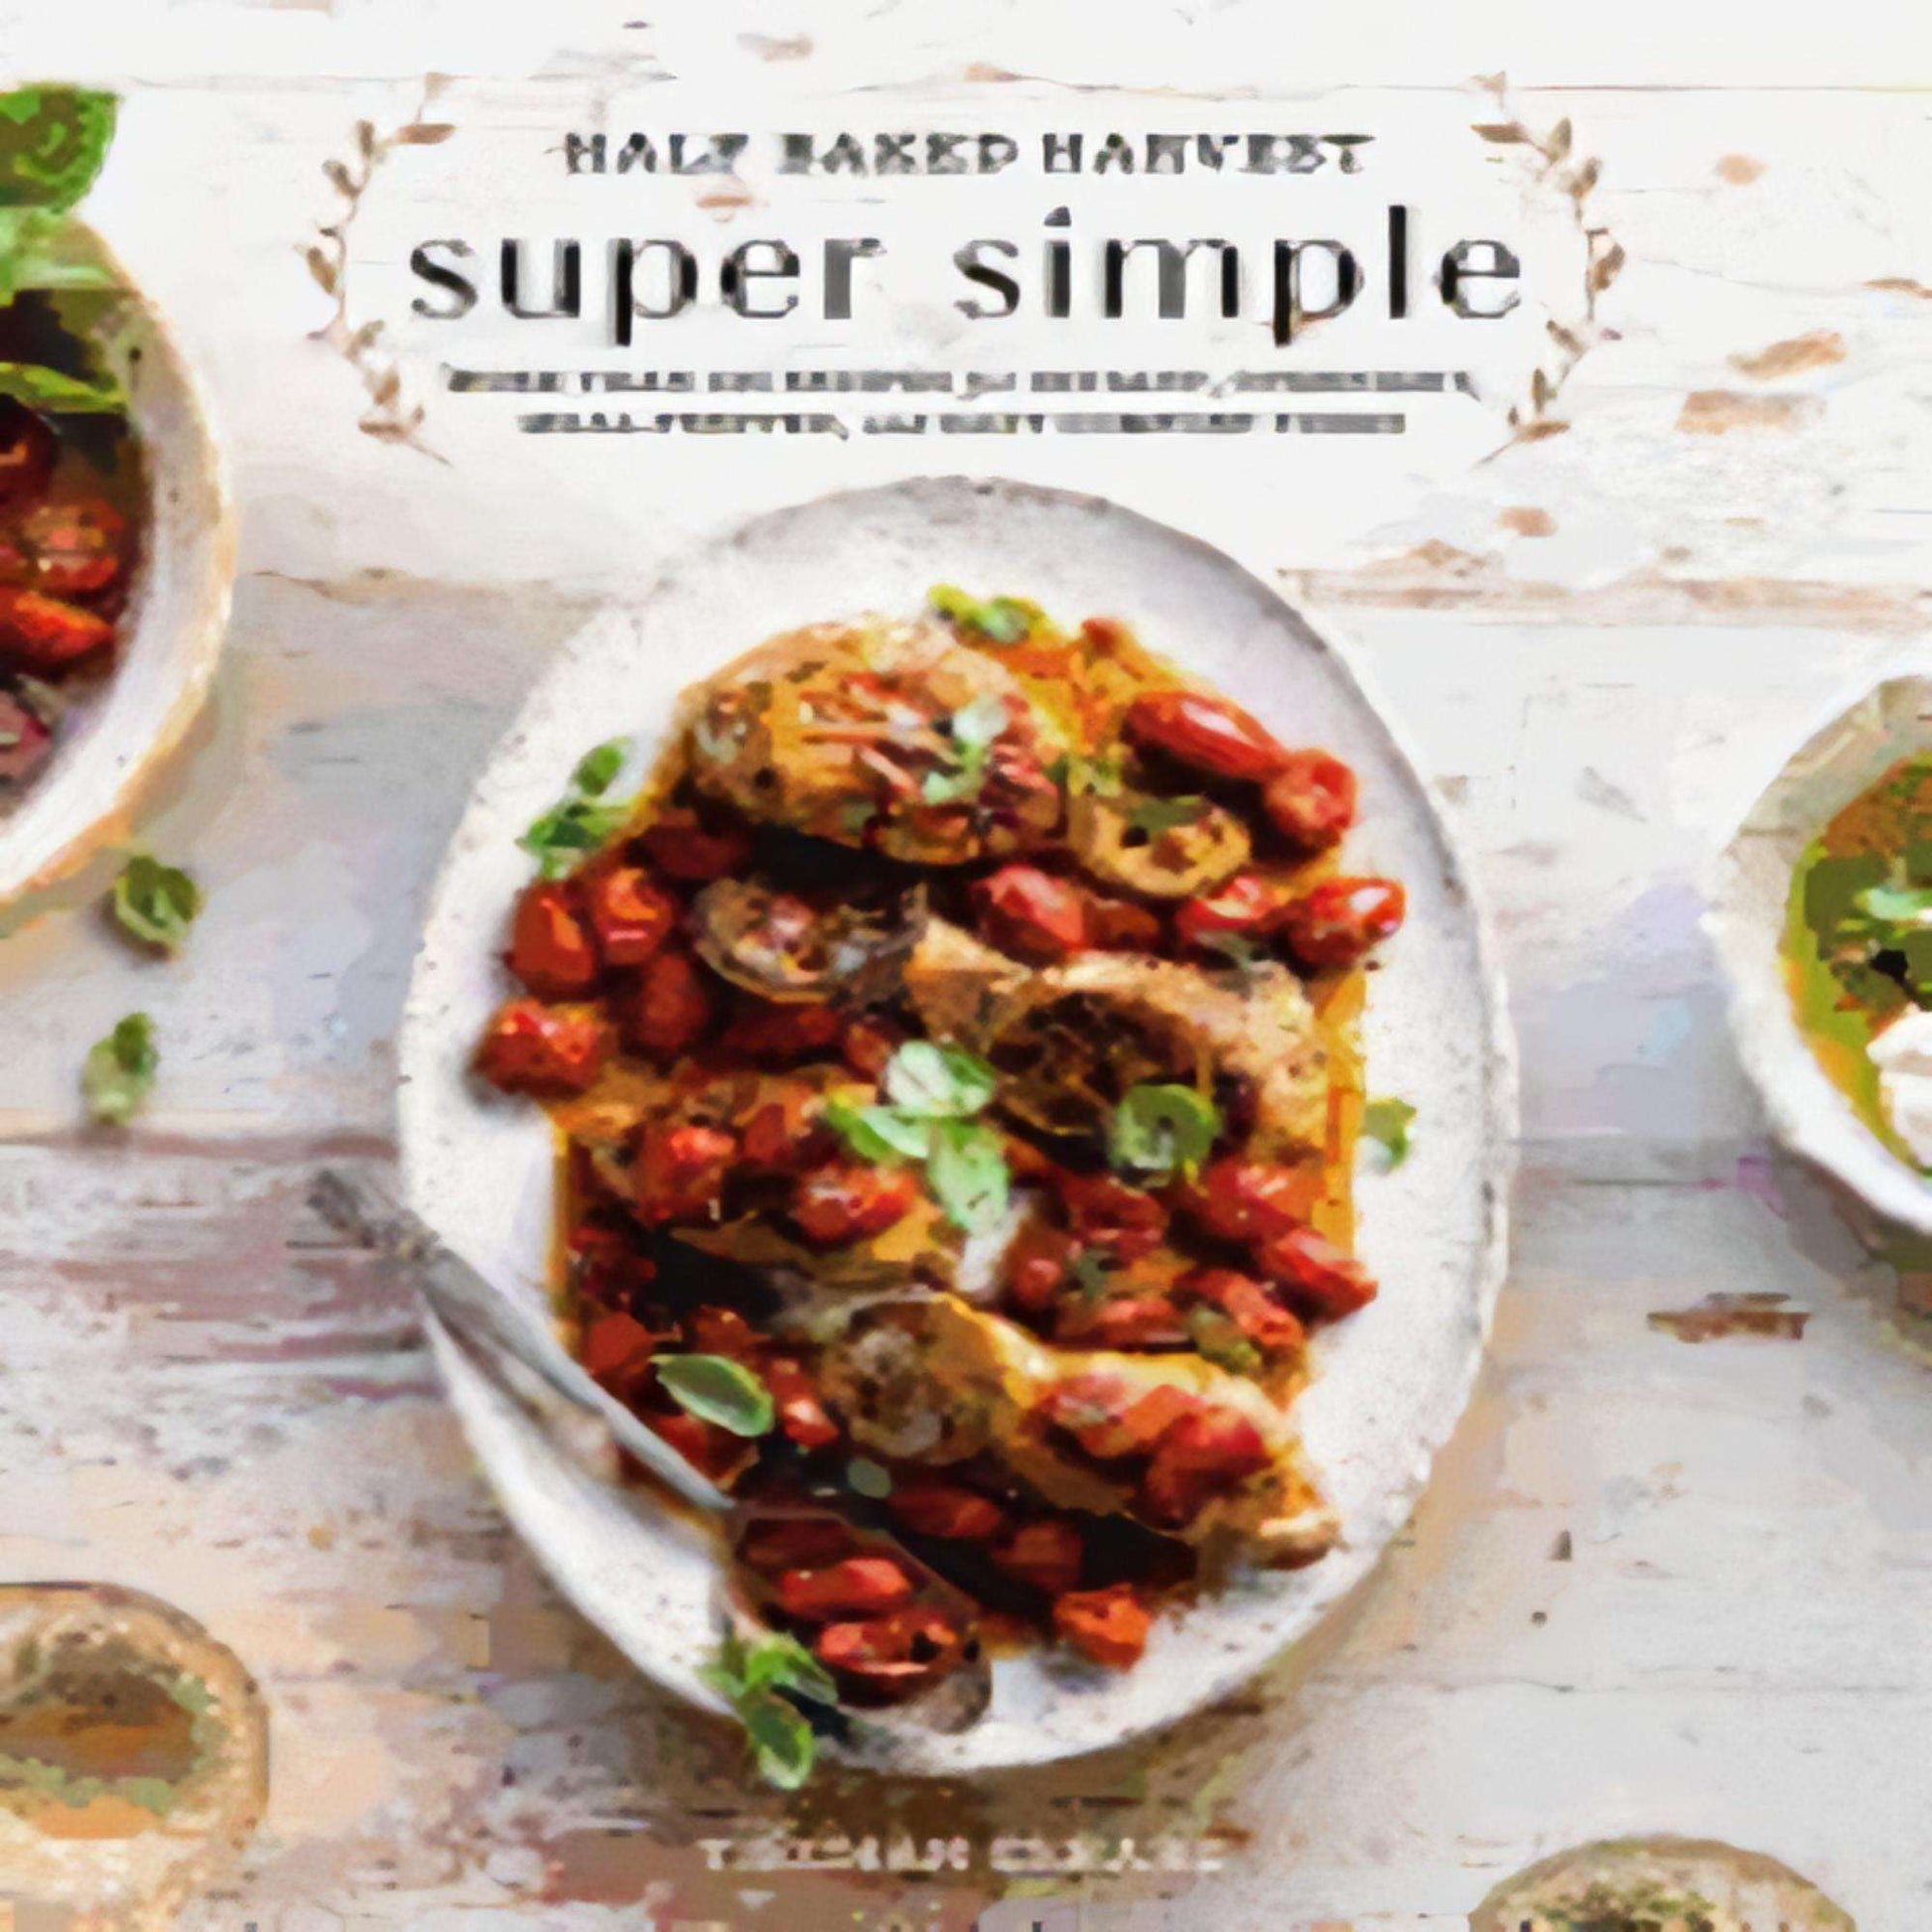 TEXTBOOK Half Baked Harvest Super Simple: More Than 125 Recipes for Instant, Overnight, Meal-Prepped, and Easy Comfort Foods: A Cookbook173-022823-0525577076DPGBOOKSTORE.COM. Today's Bestsellers.